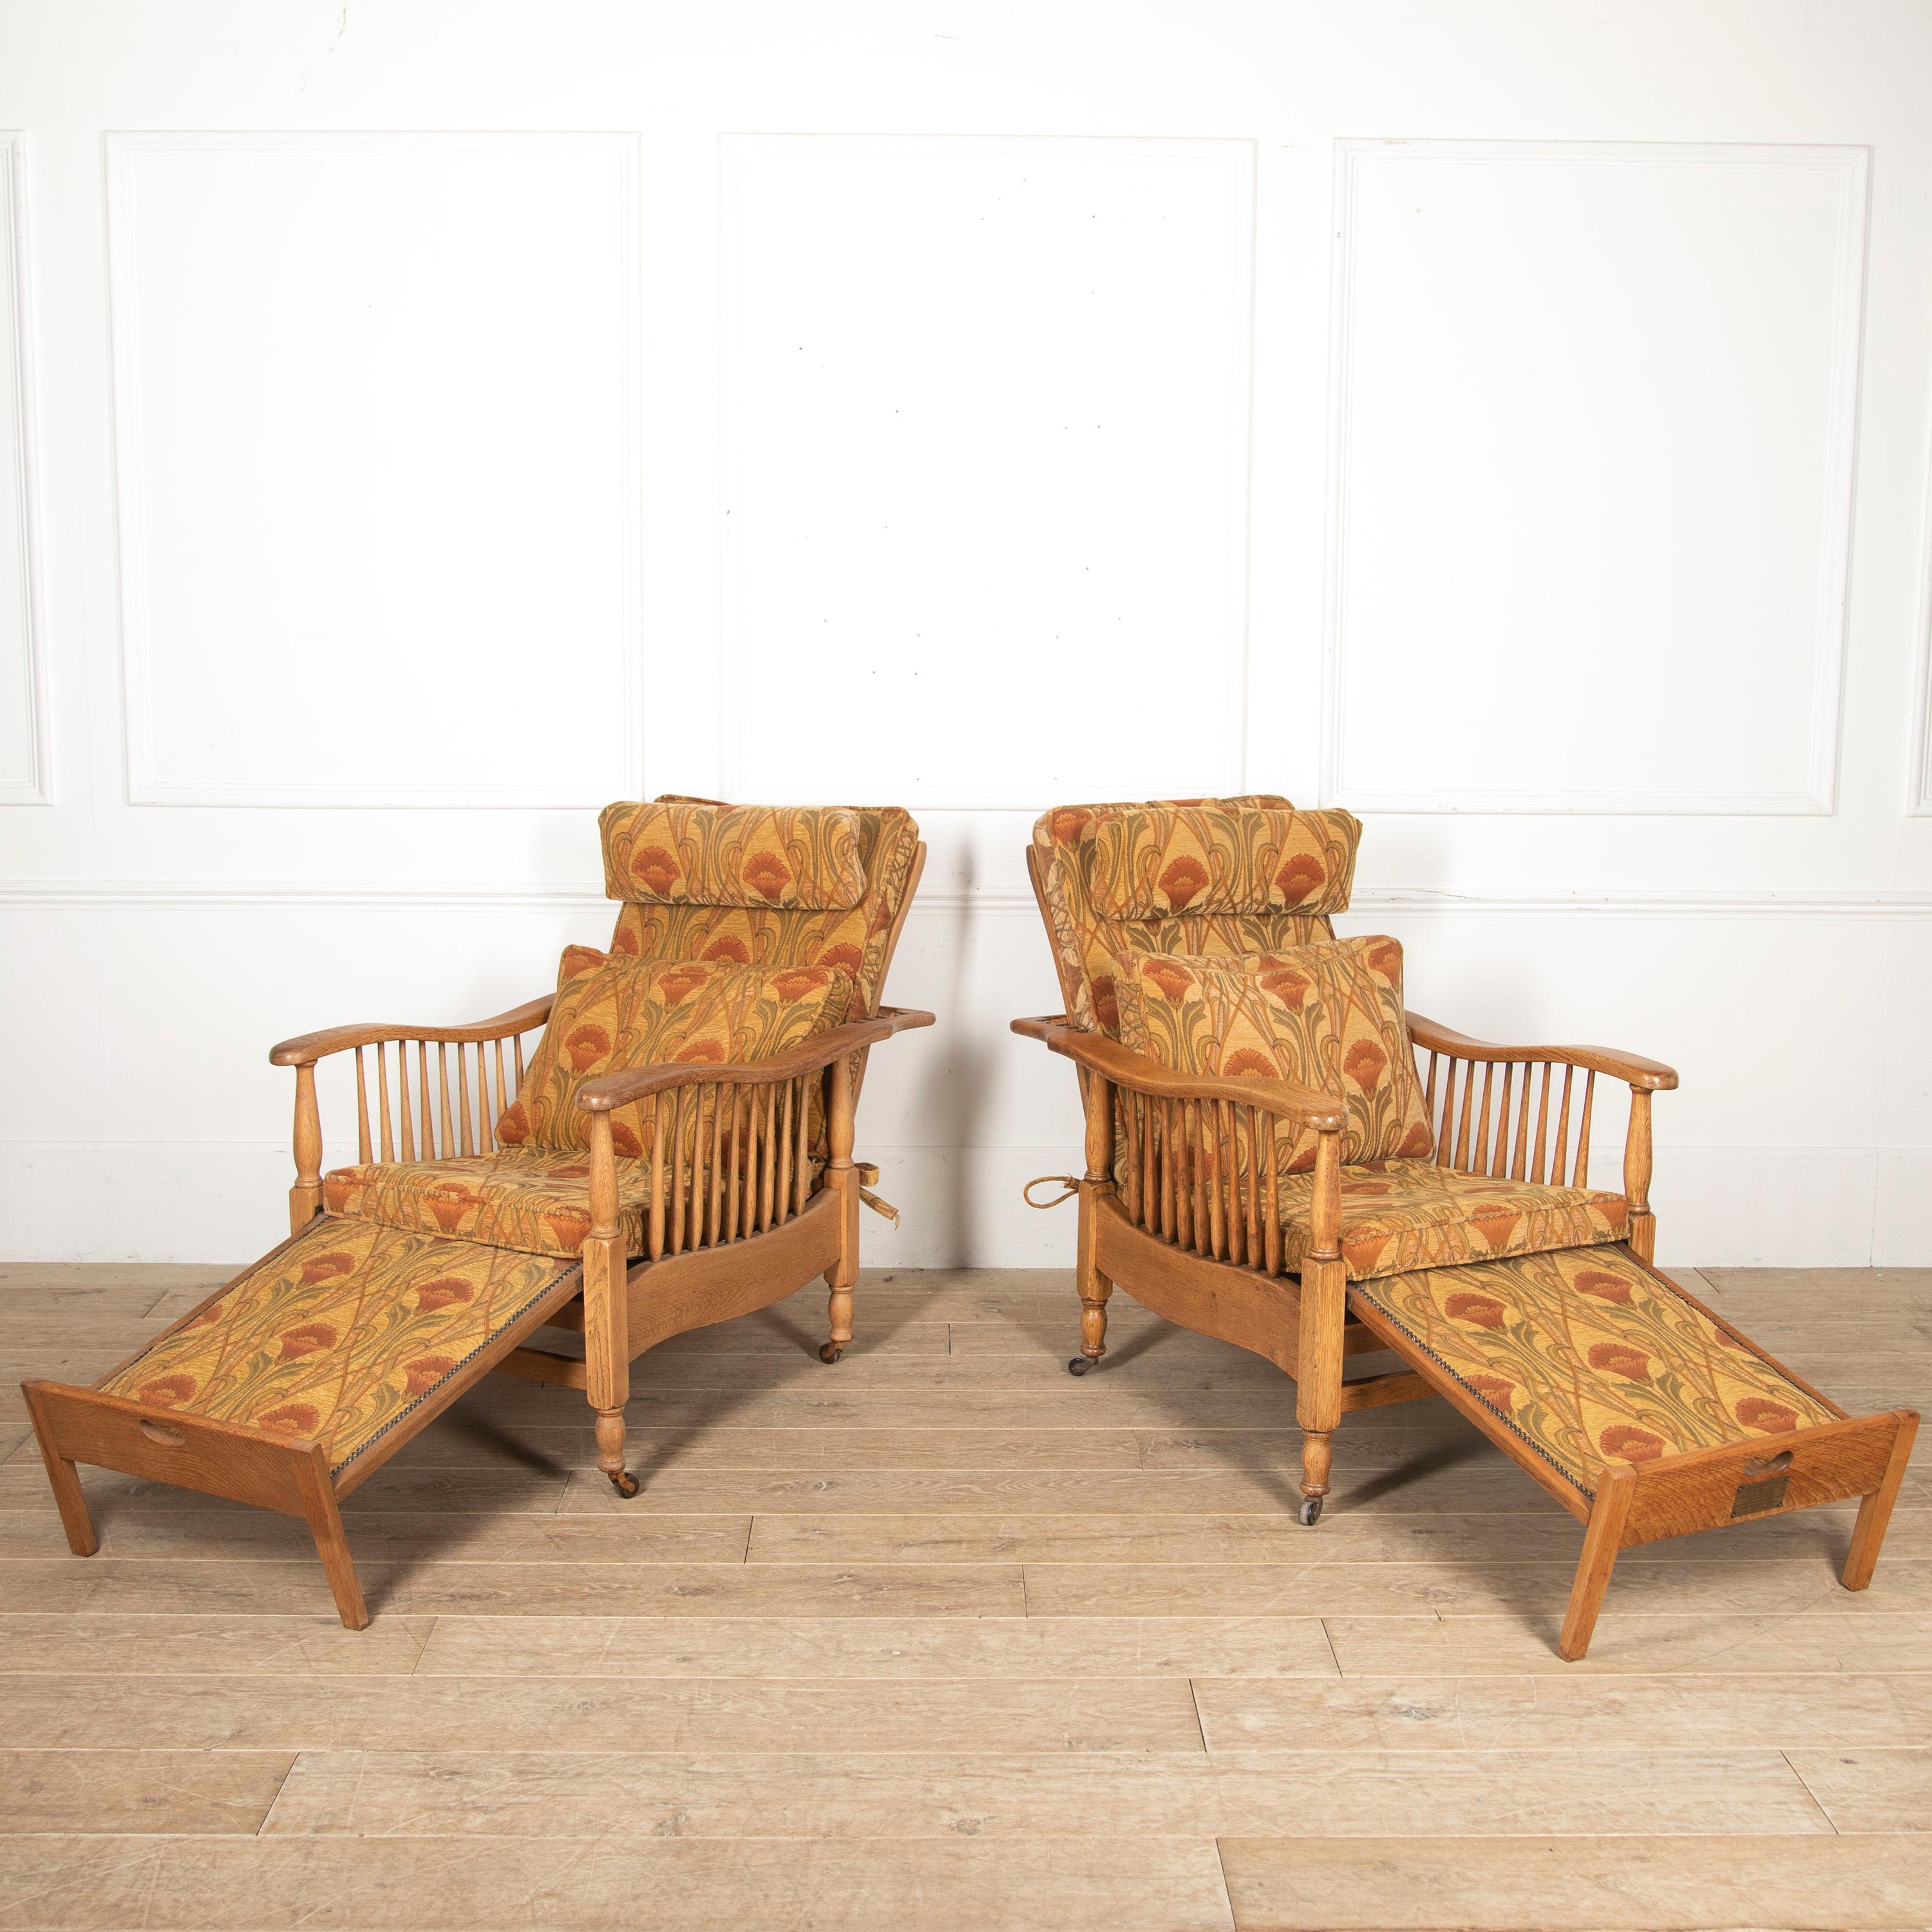 20th Century Pair of Arts & Crafts Recliners